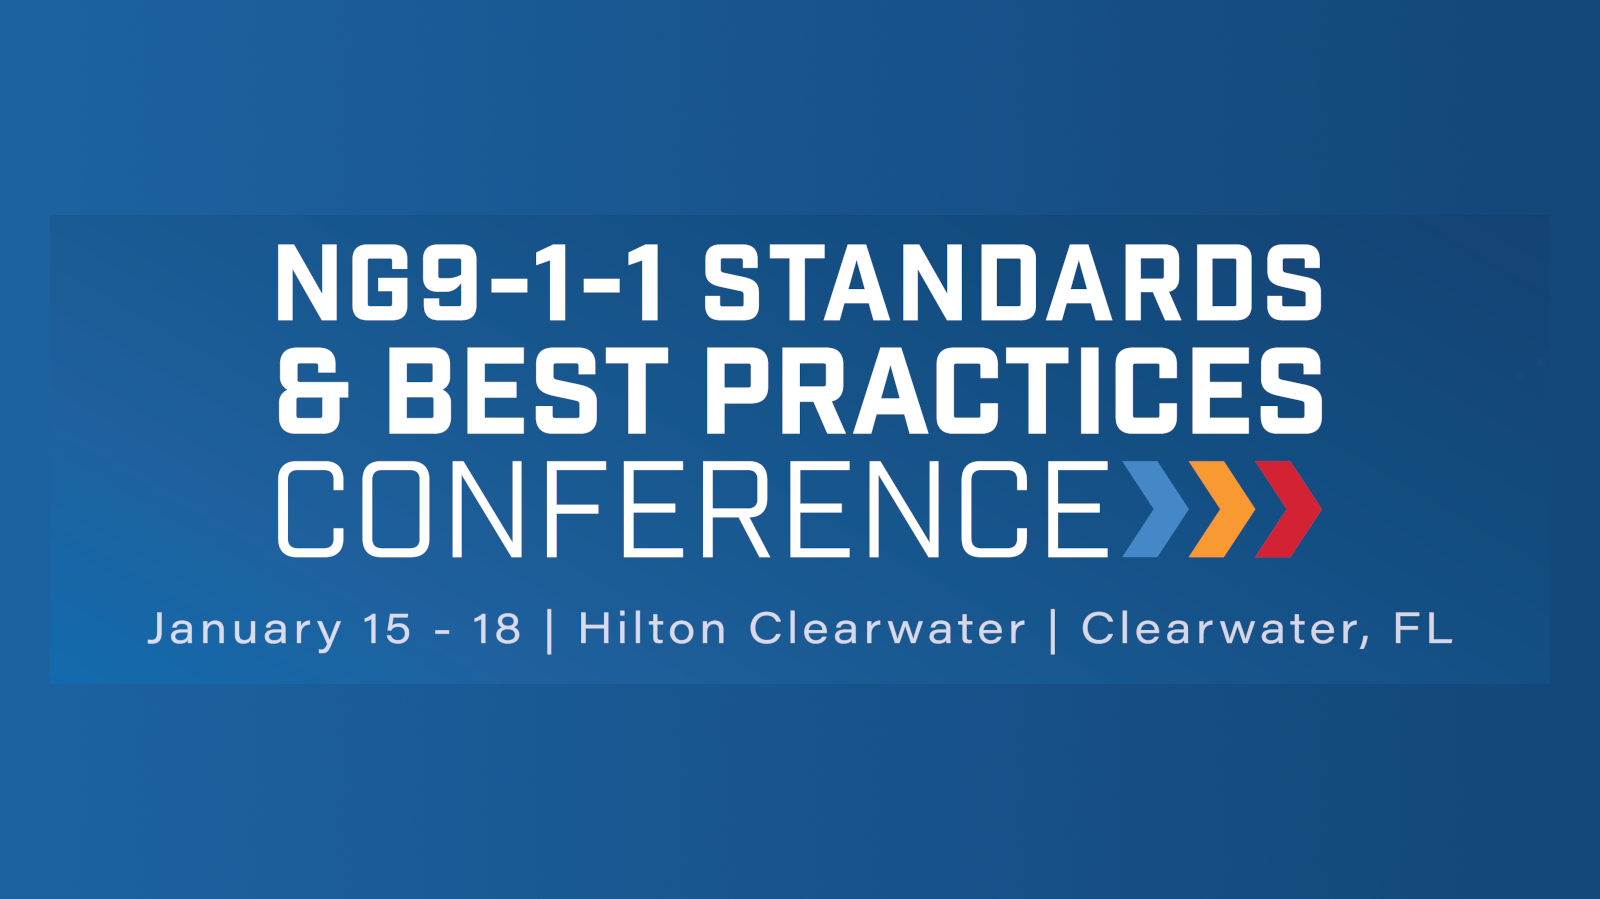 NG9-1-1 Standards & Best Practices